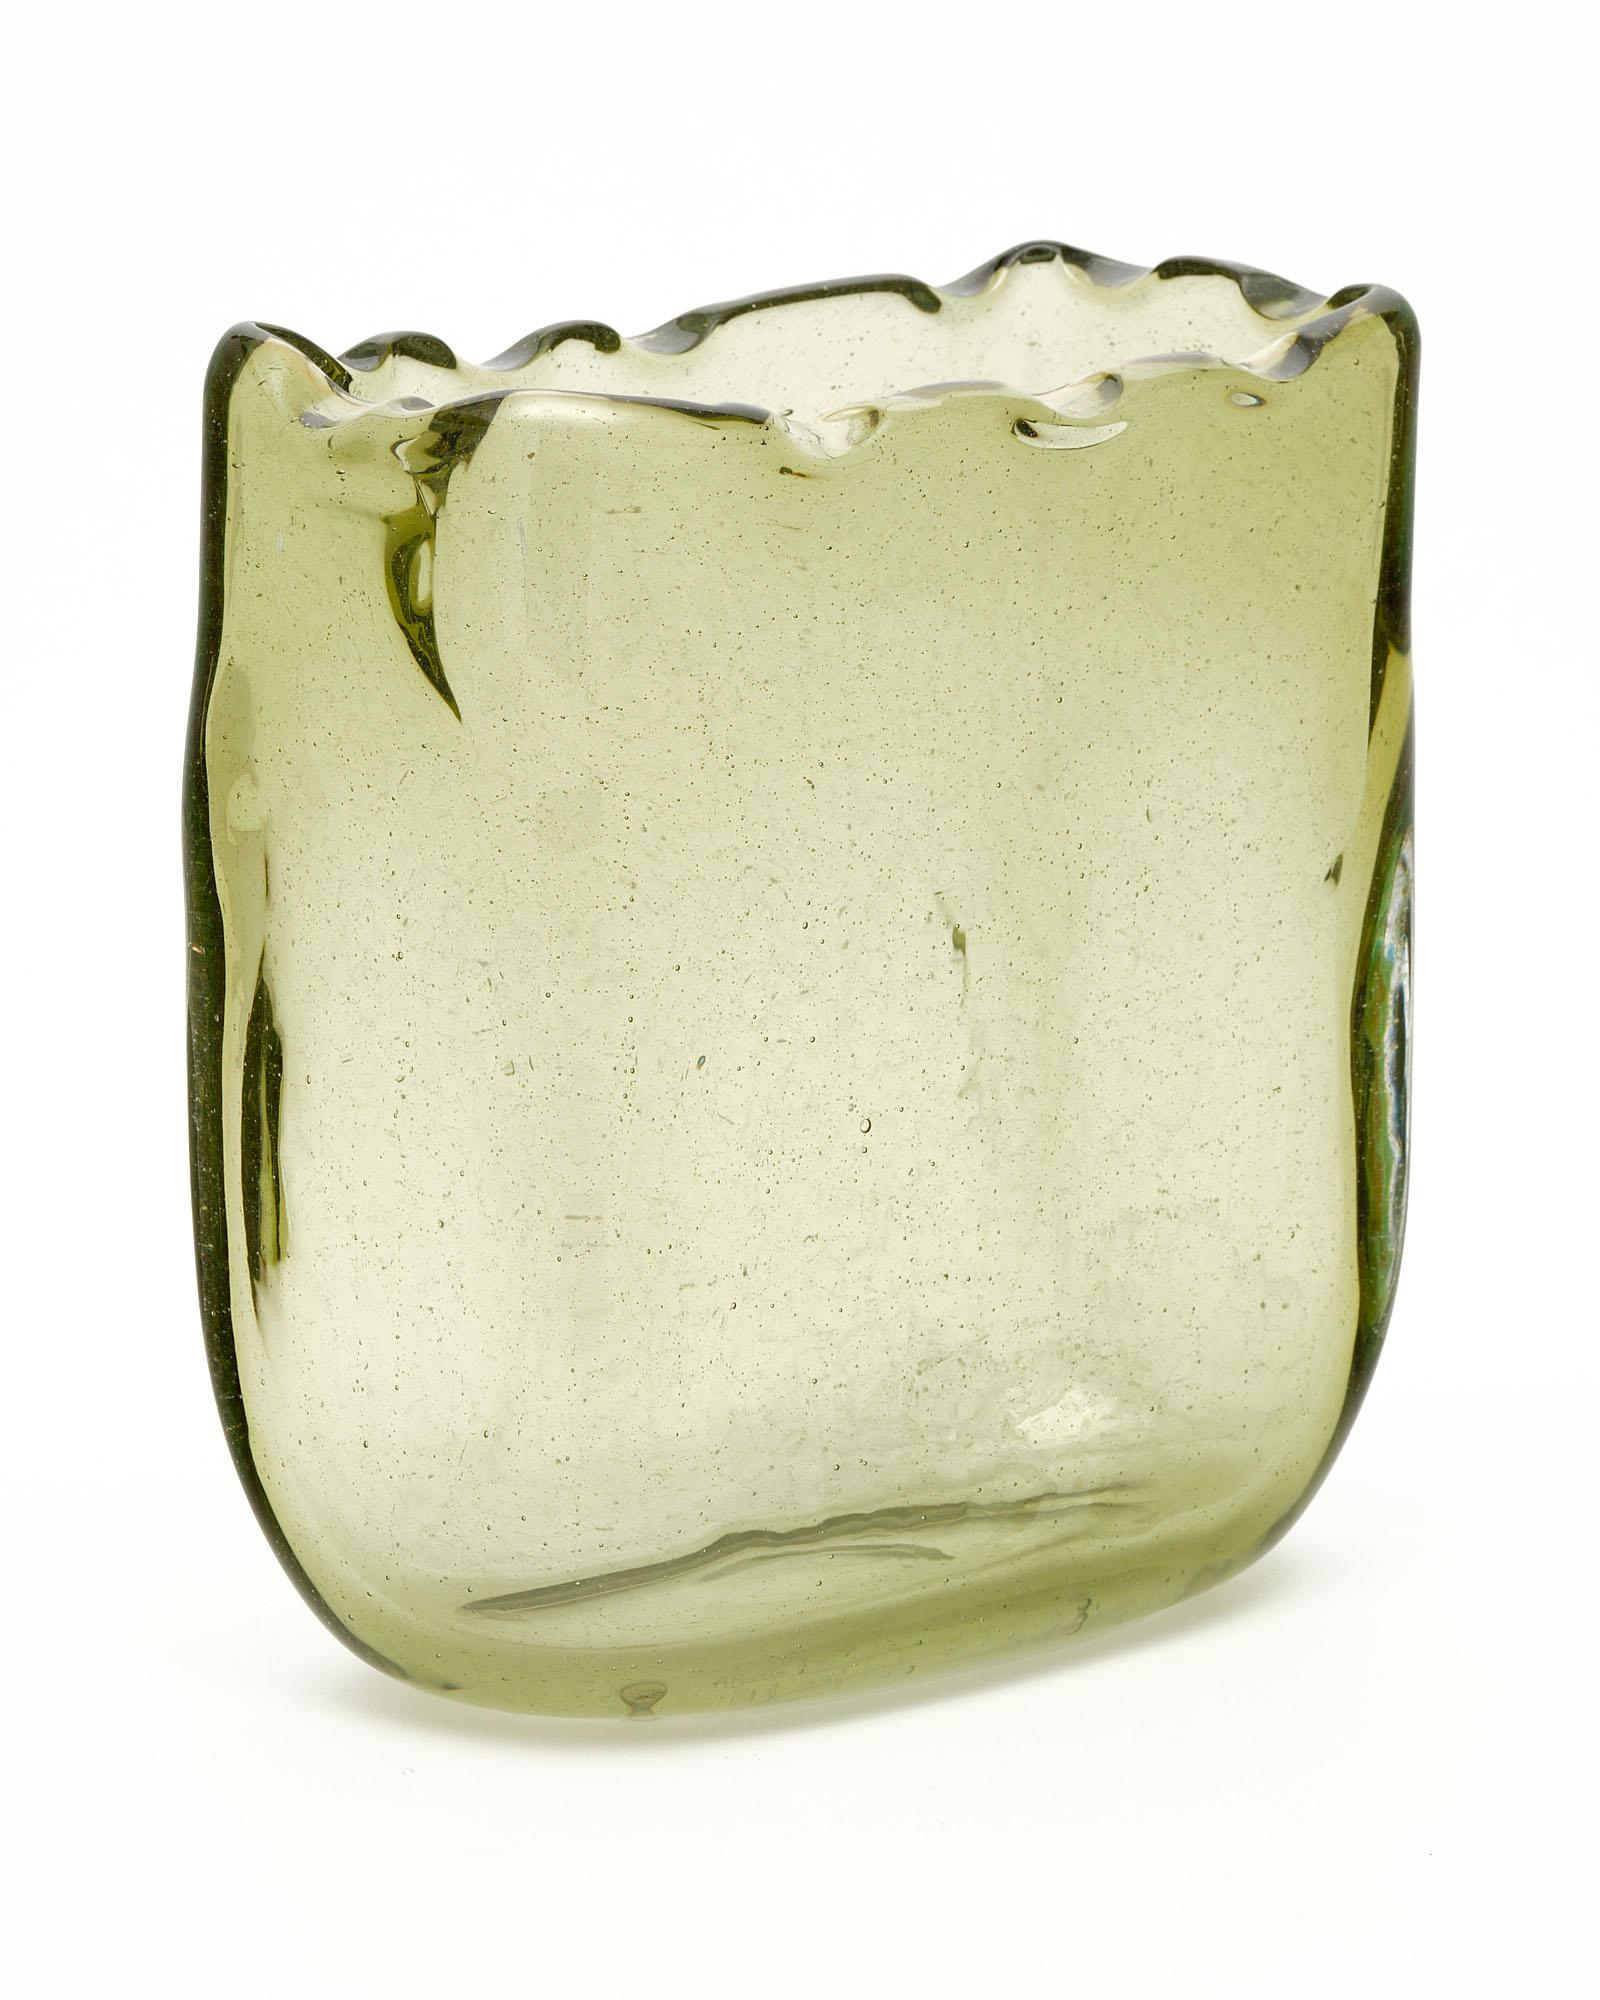 Vase from the Murano Island outside of Venice. This piece has an inorganic shape and a striking smoked blown glass coloring with shades of green. It is hand-crafted.